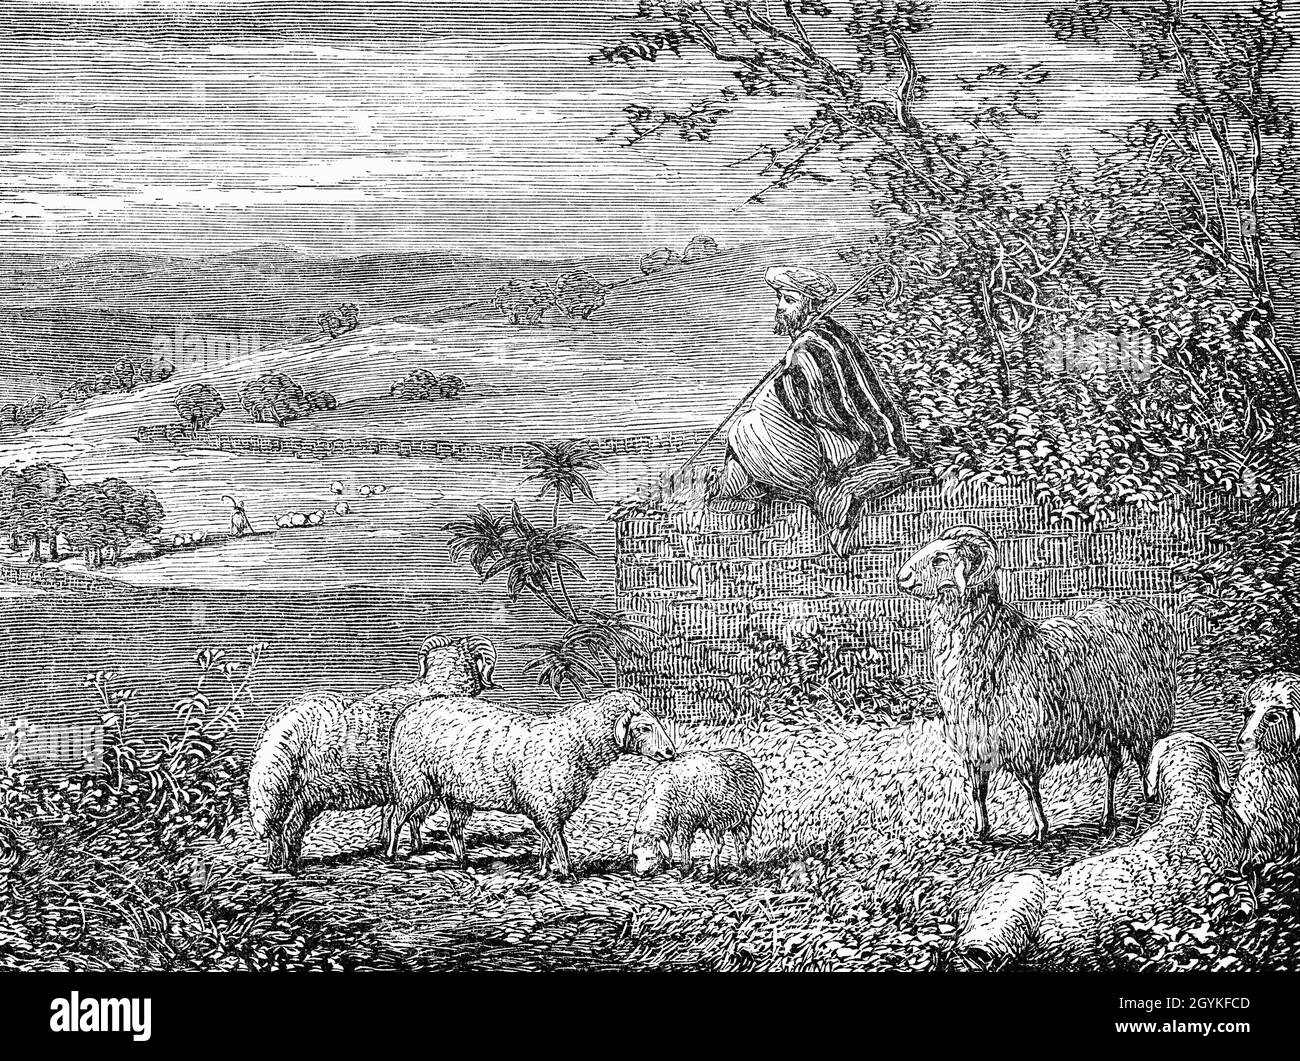 A late 19th Century illustration from the Book of Genesis of a shepherd watching his flock at the time of Abraham, the common patriarch of the Abrahamic religions, including Judaism, Christianity, and Islam. In Judaism, from 2150 BCE to 1975 BCE Stock Photo